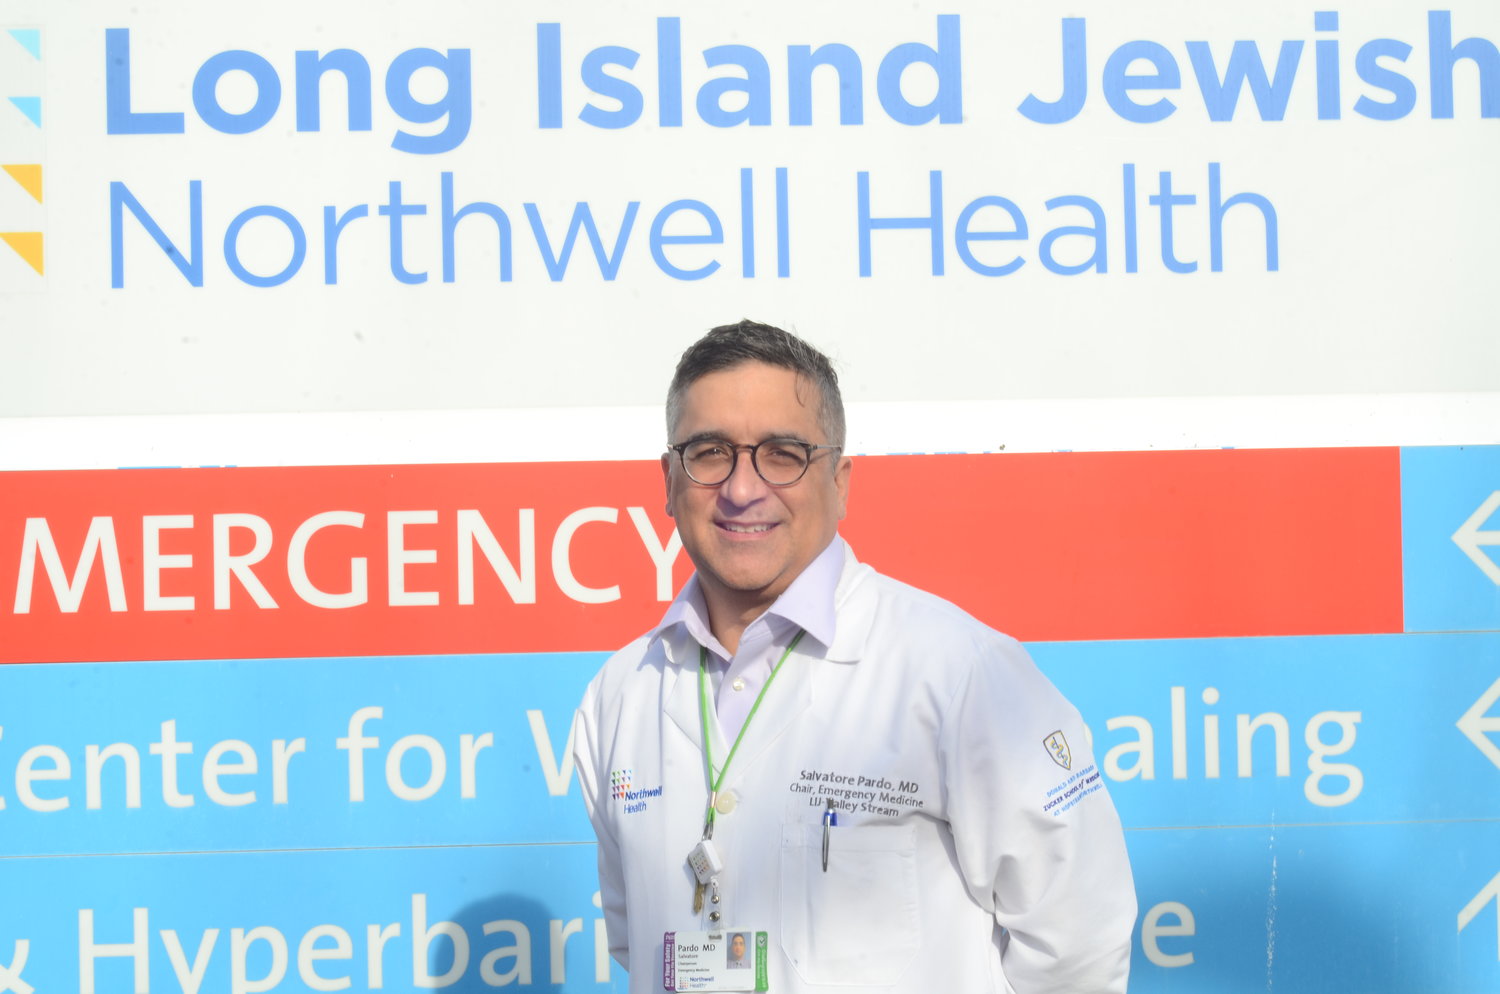 Dr. Salvatore Pardo, Chair of Emergency Services at LIJ Valley Stream hospital, is dealing with the stresses of an understaffed emergency room, but is optimistic that the hospital has weathered the worst of the surge